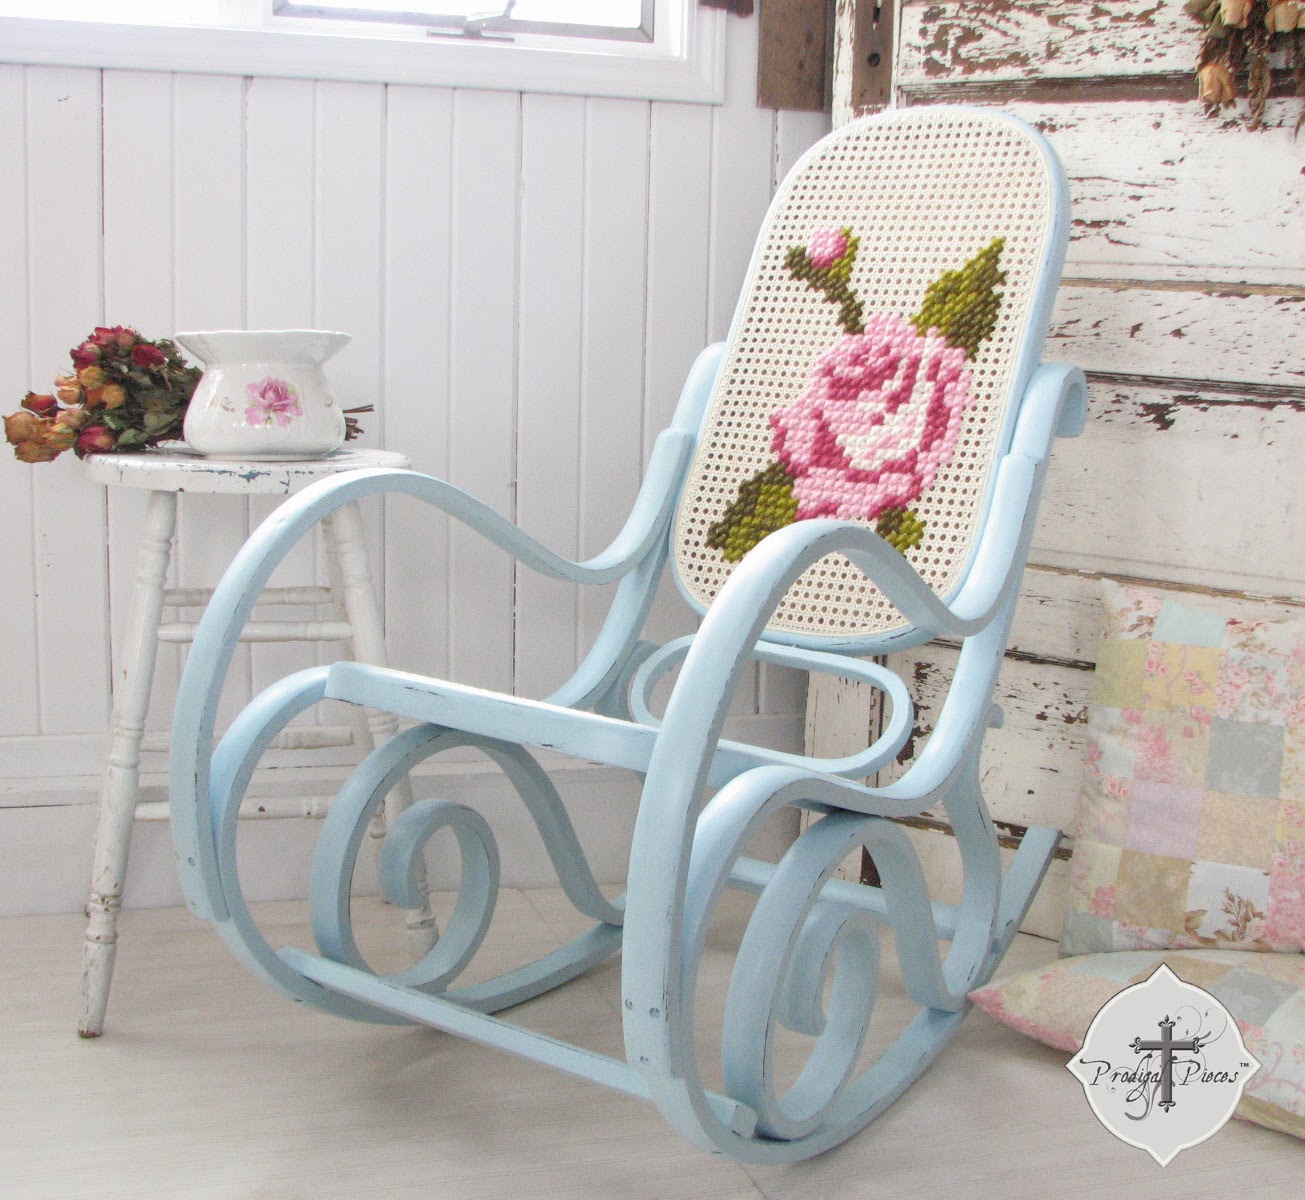 Shabby Chic Bentwood Rocking Chair with Hand-Embroidered Rose via Prodigal Pieces